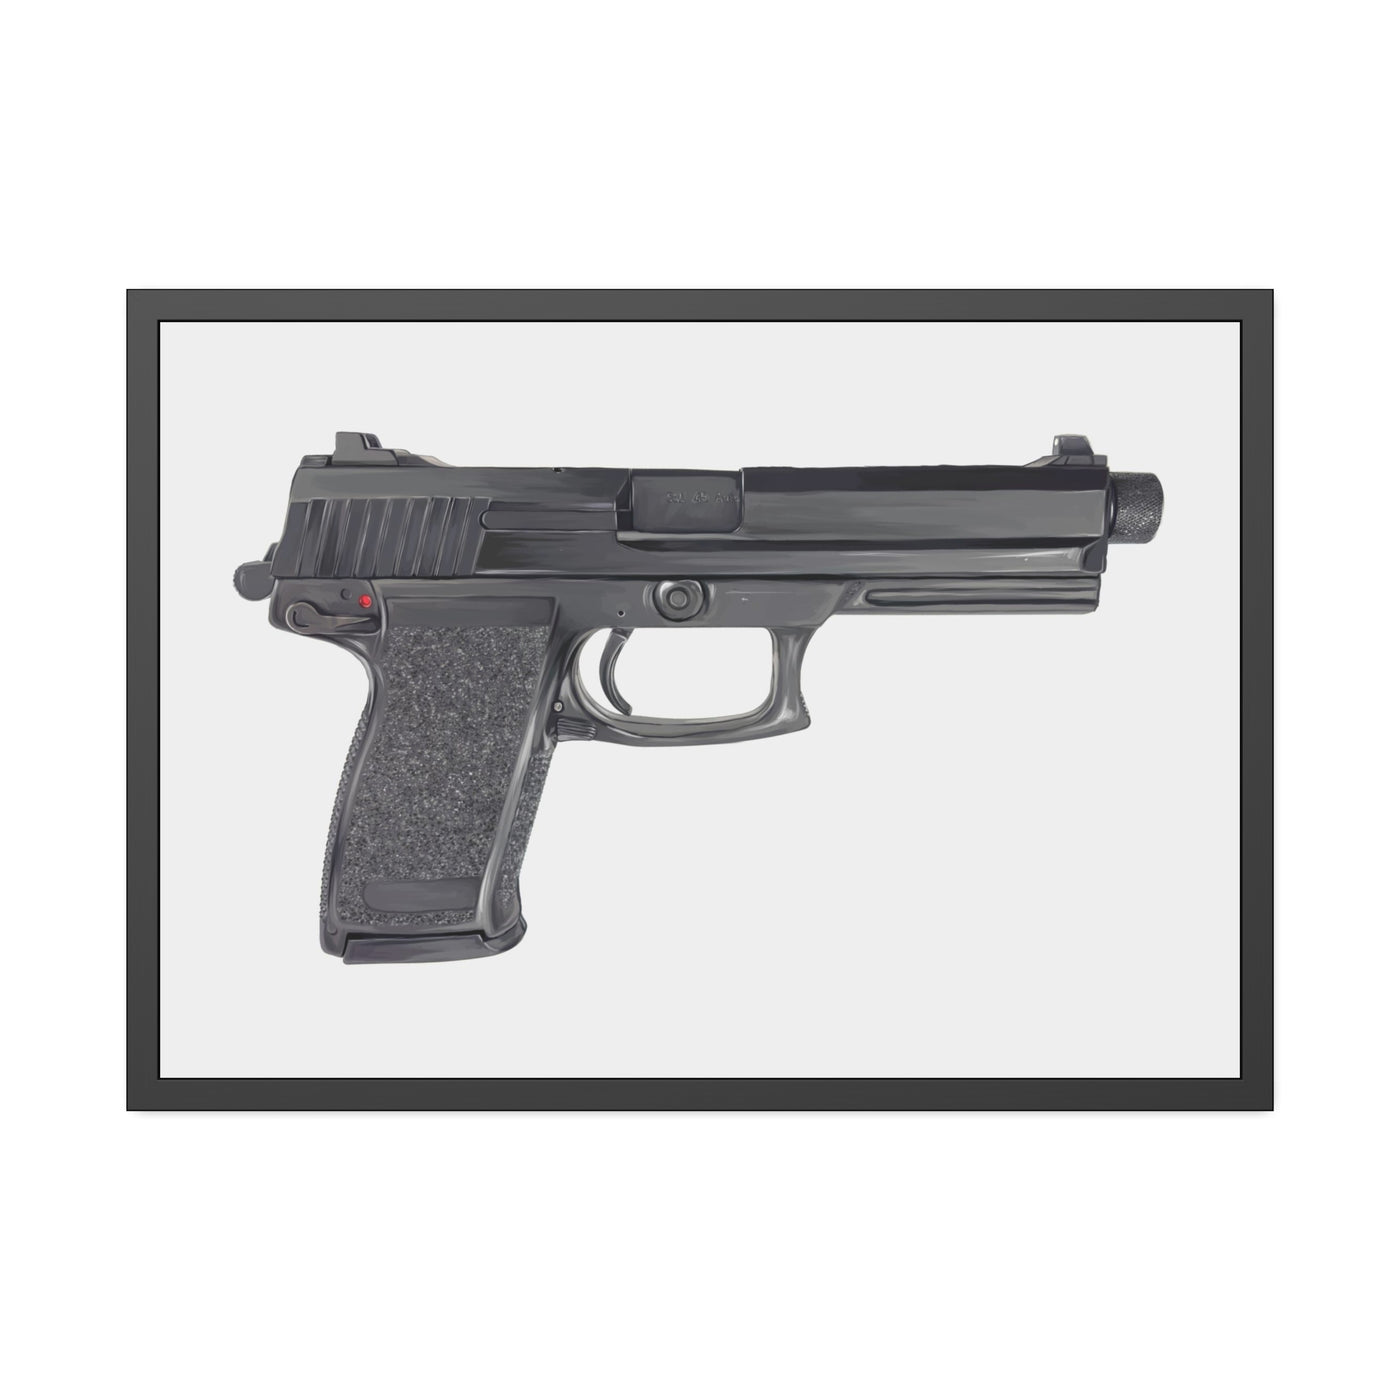 Tactical .45 ACP Poly Pistol Painting - Just The Piece - Black Frame - Value Collection